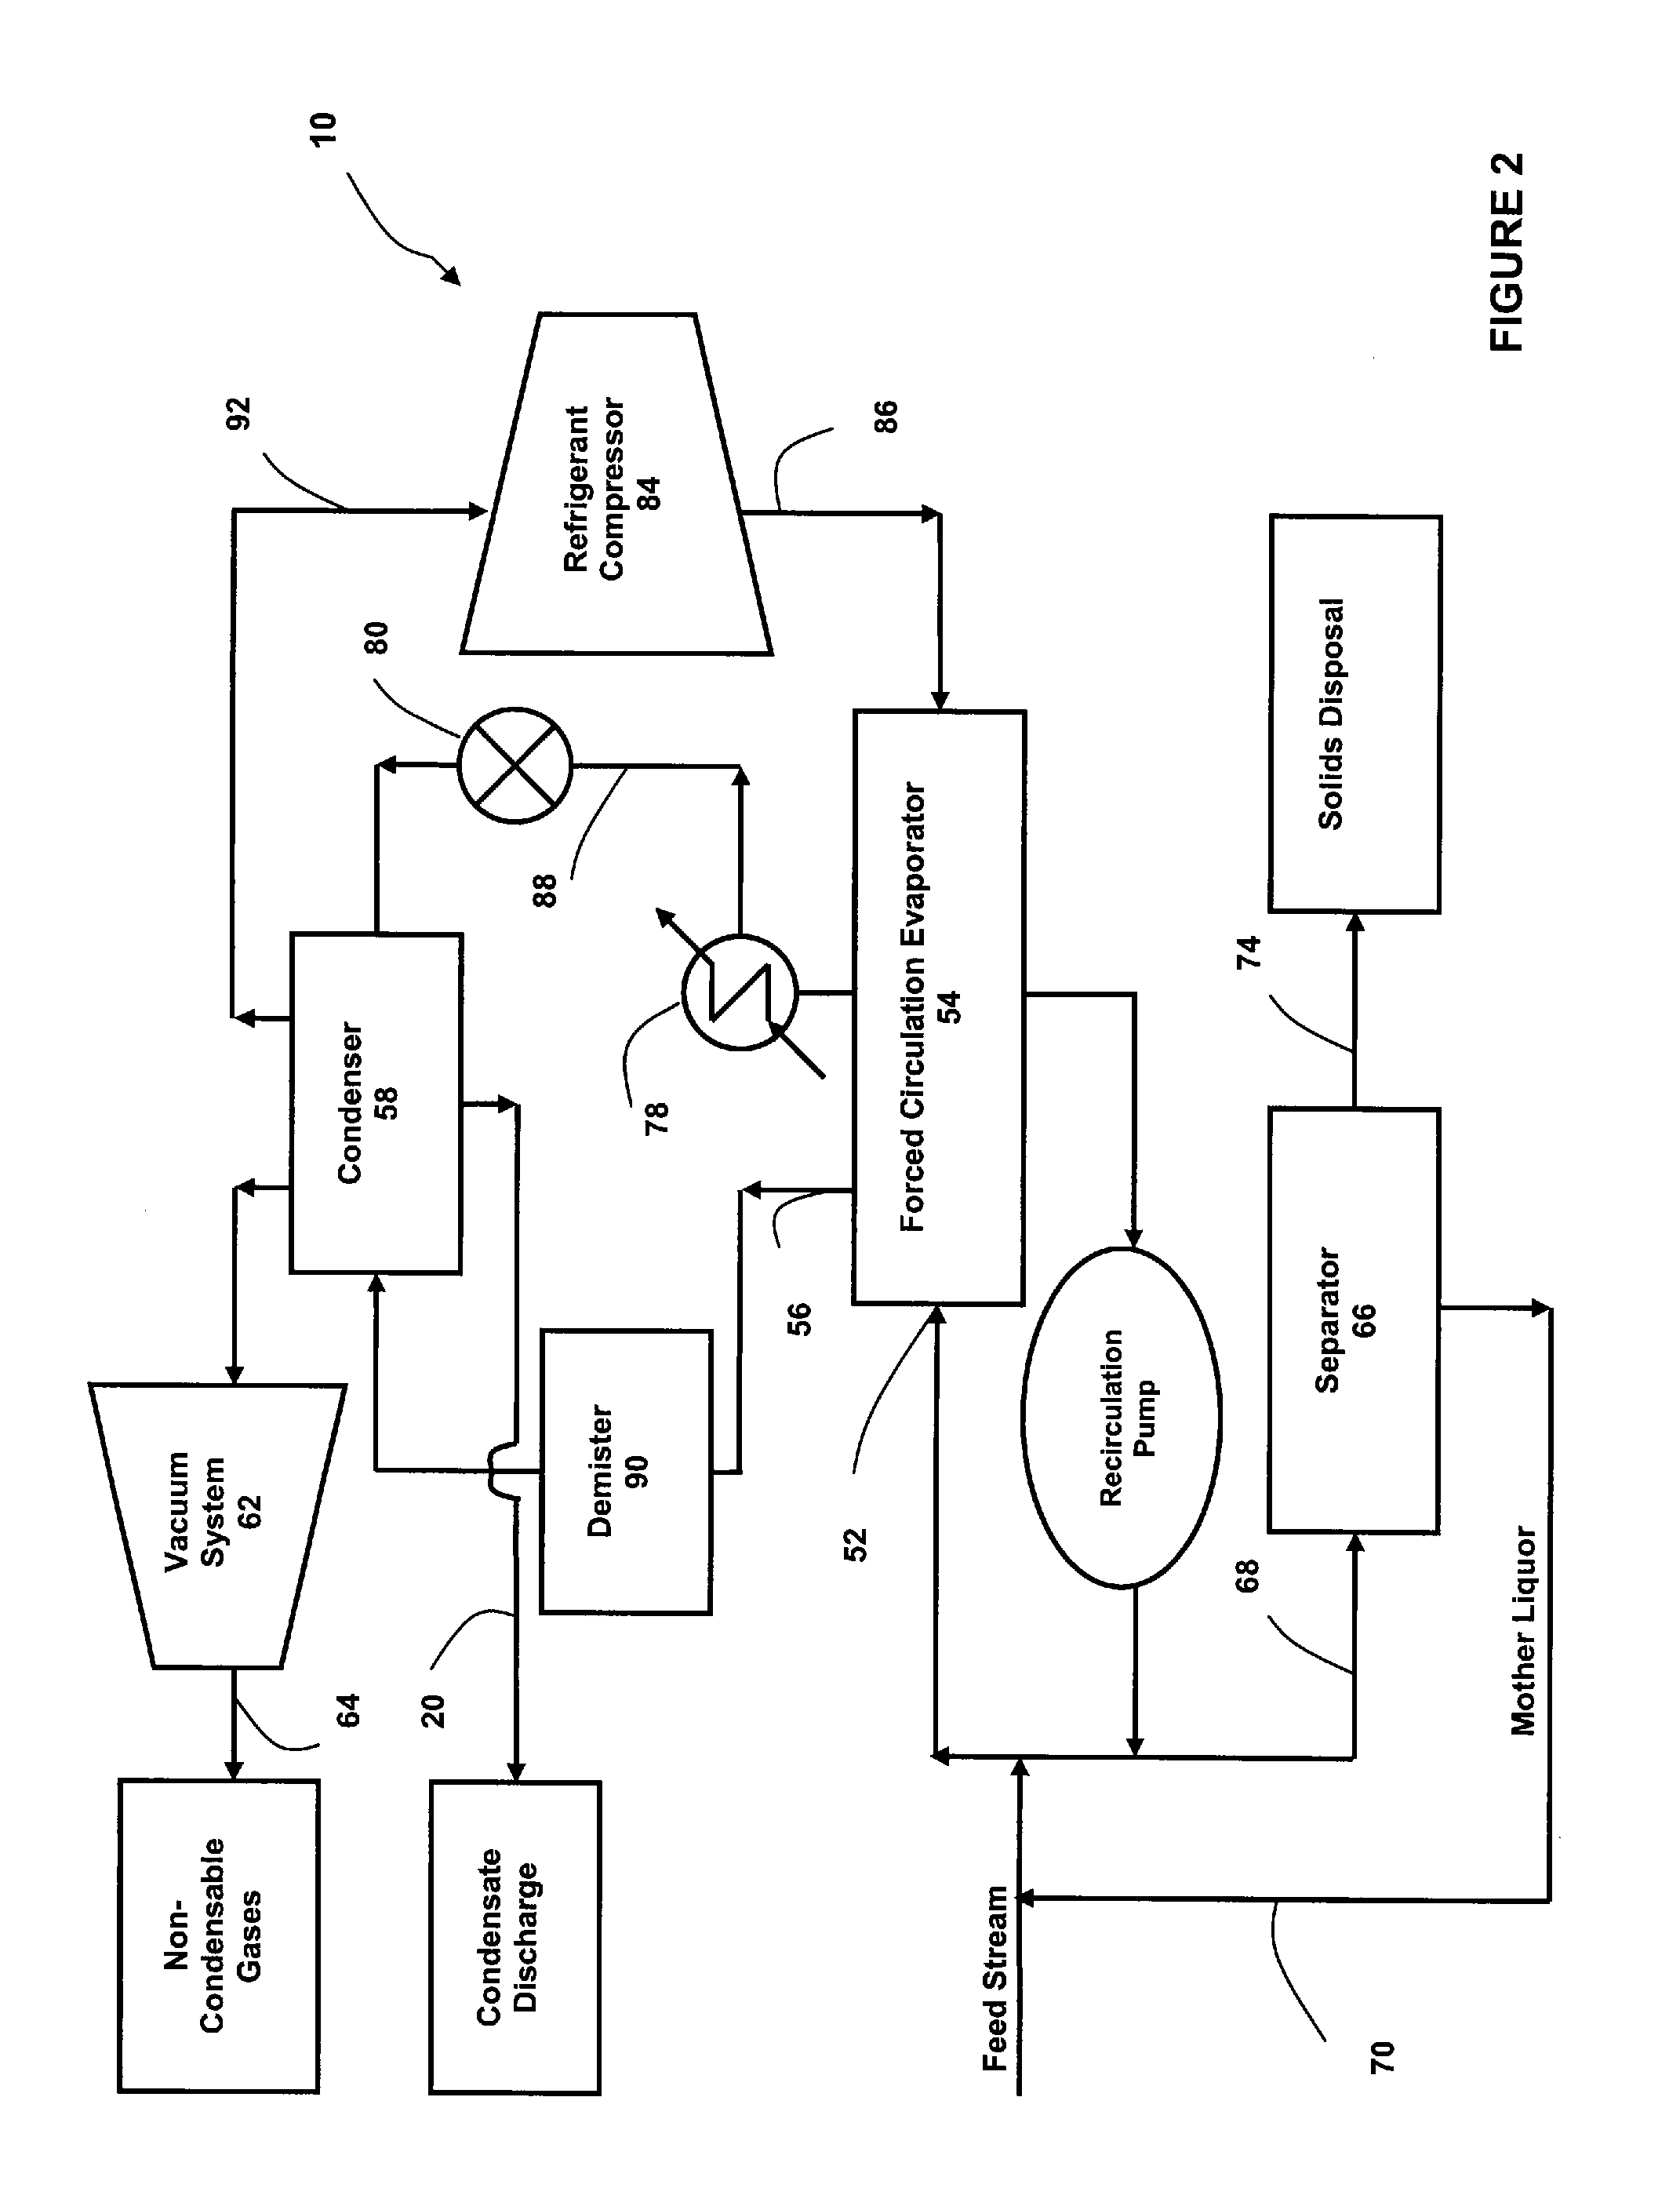 Method for Removing Dissolved Solids from Aqueous Waste Streams